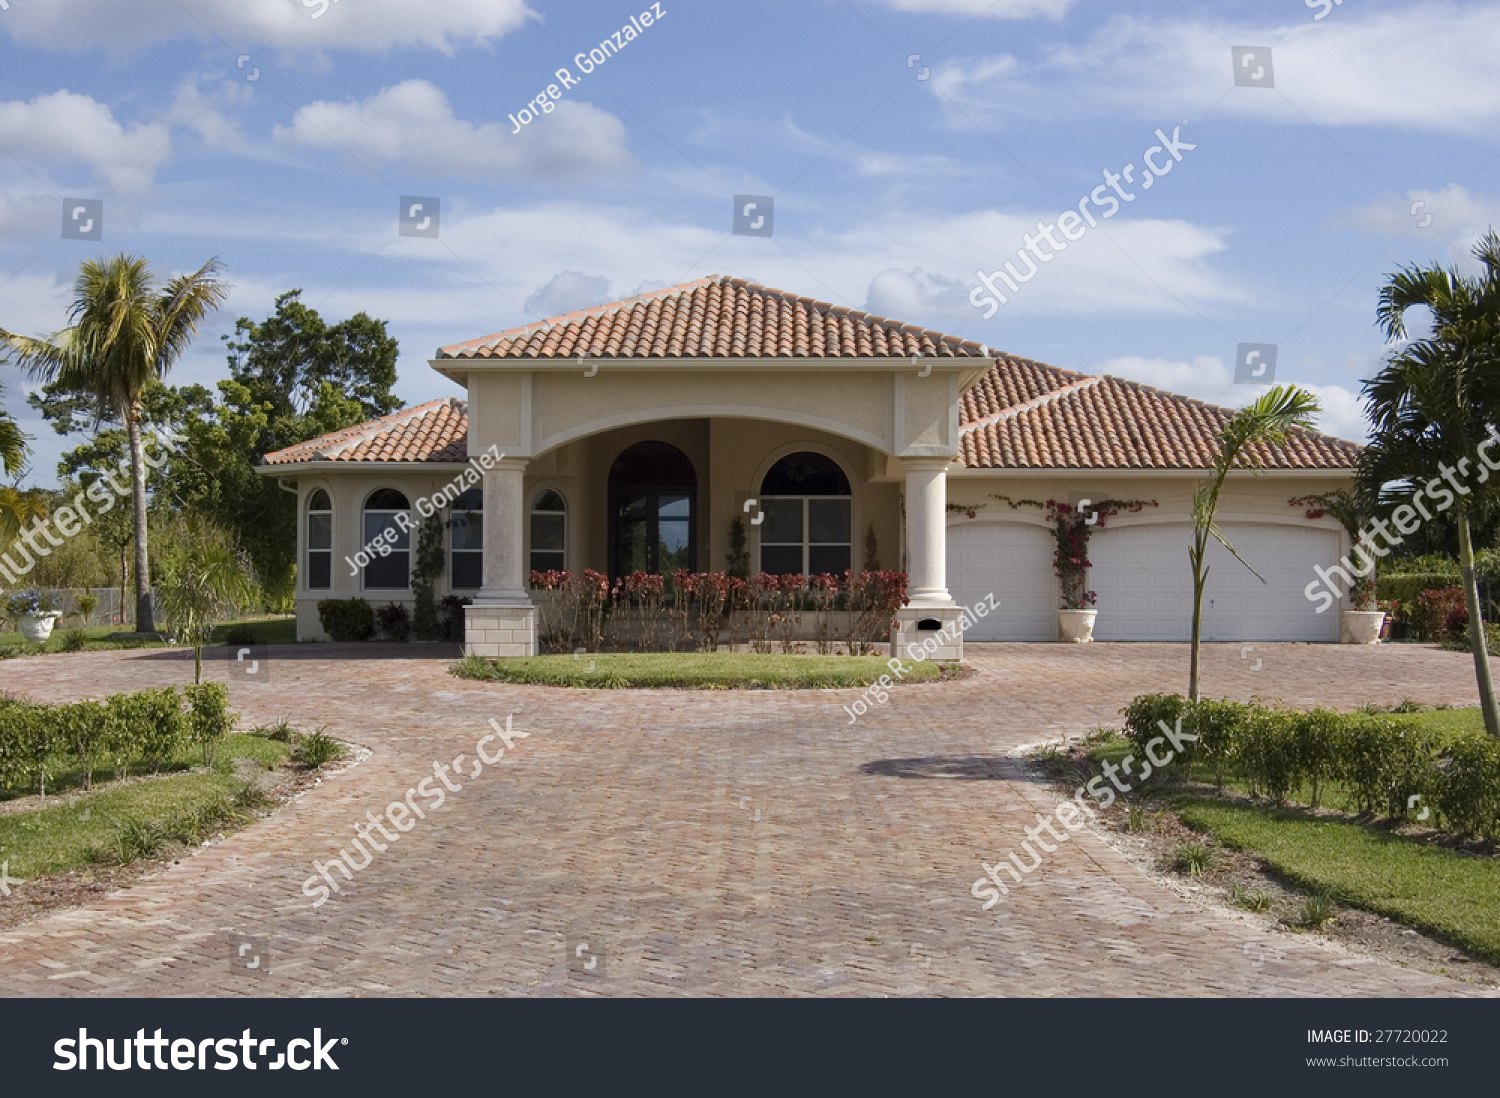 Mediterranean Style Home Showing Driveway And Main ...